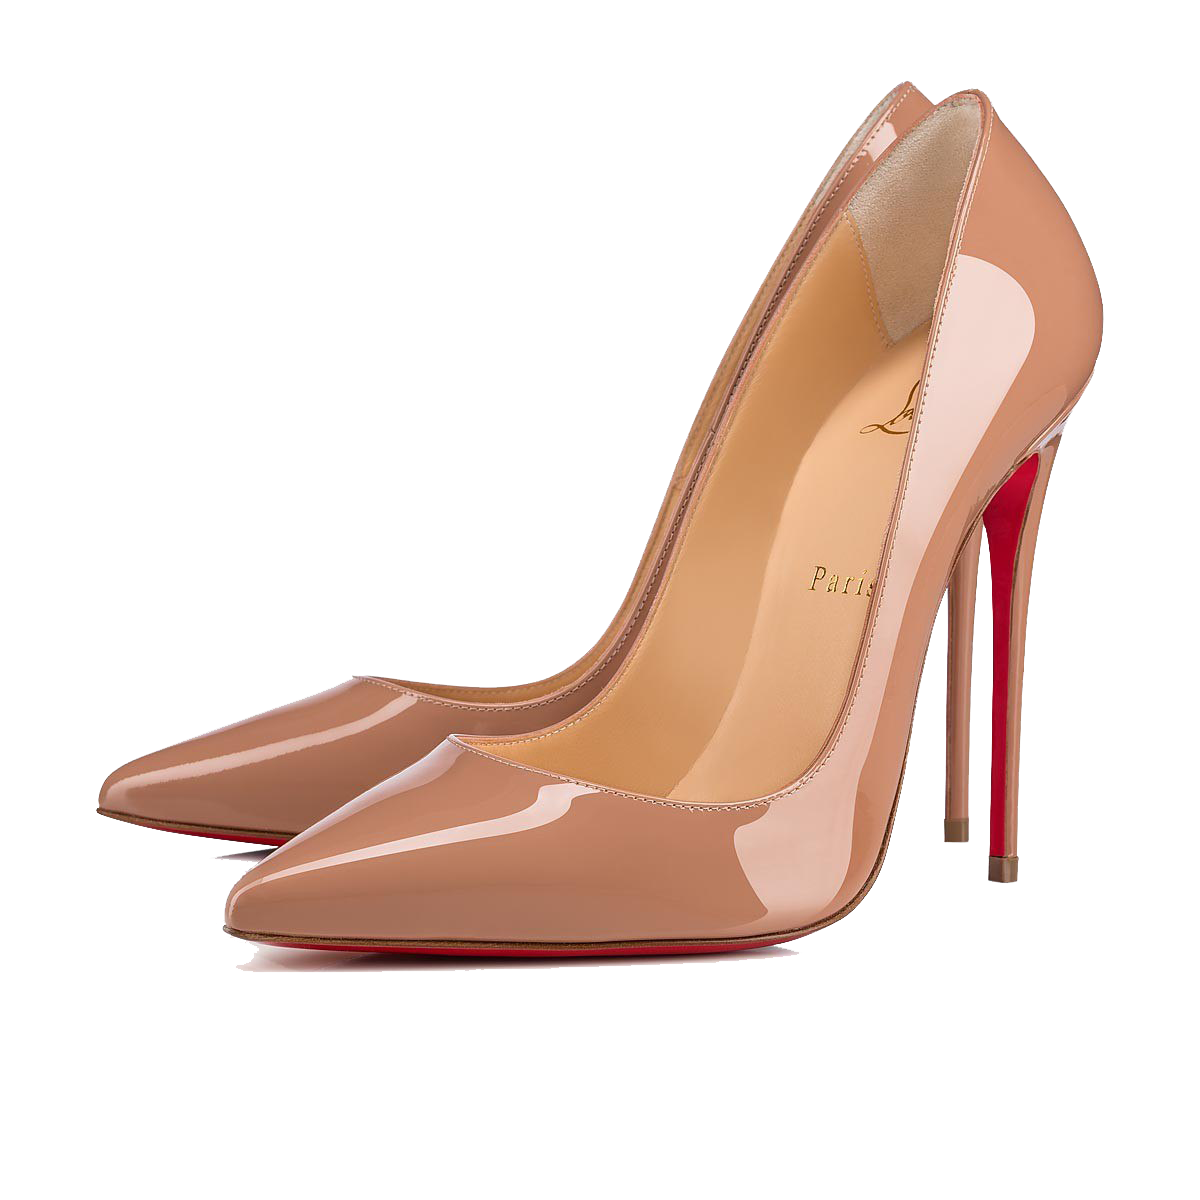 Louboutin Png Image Transparent Background Play